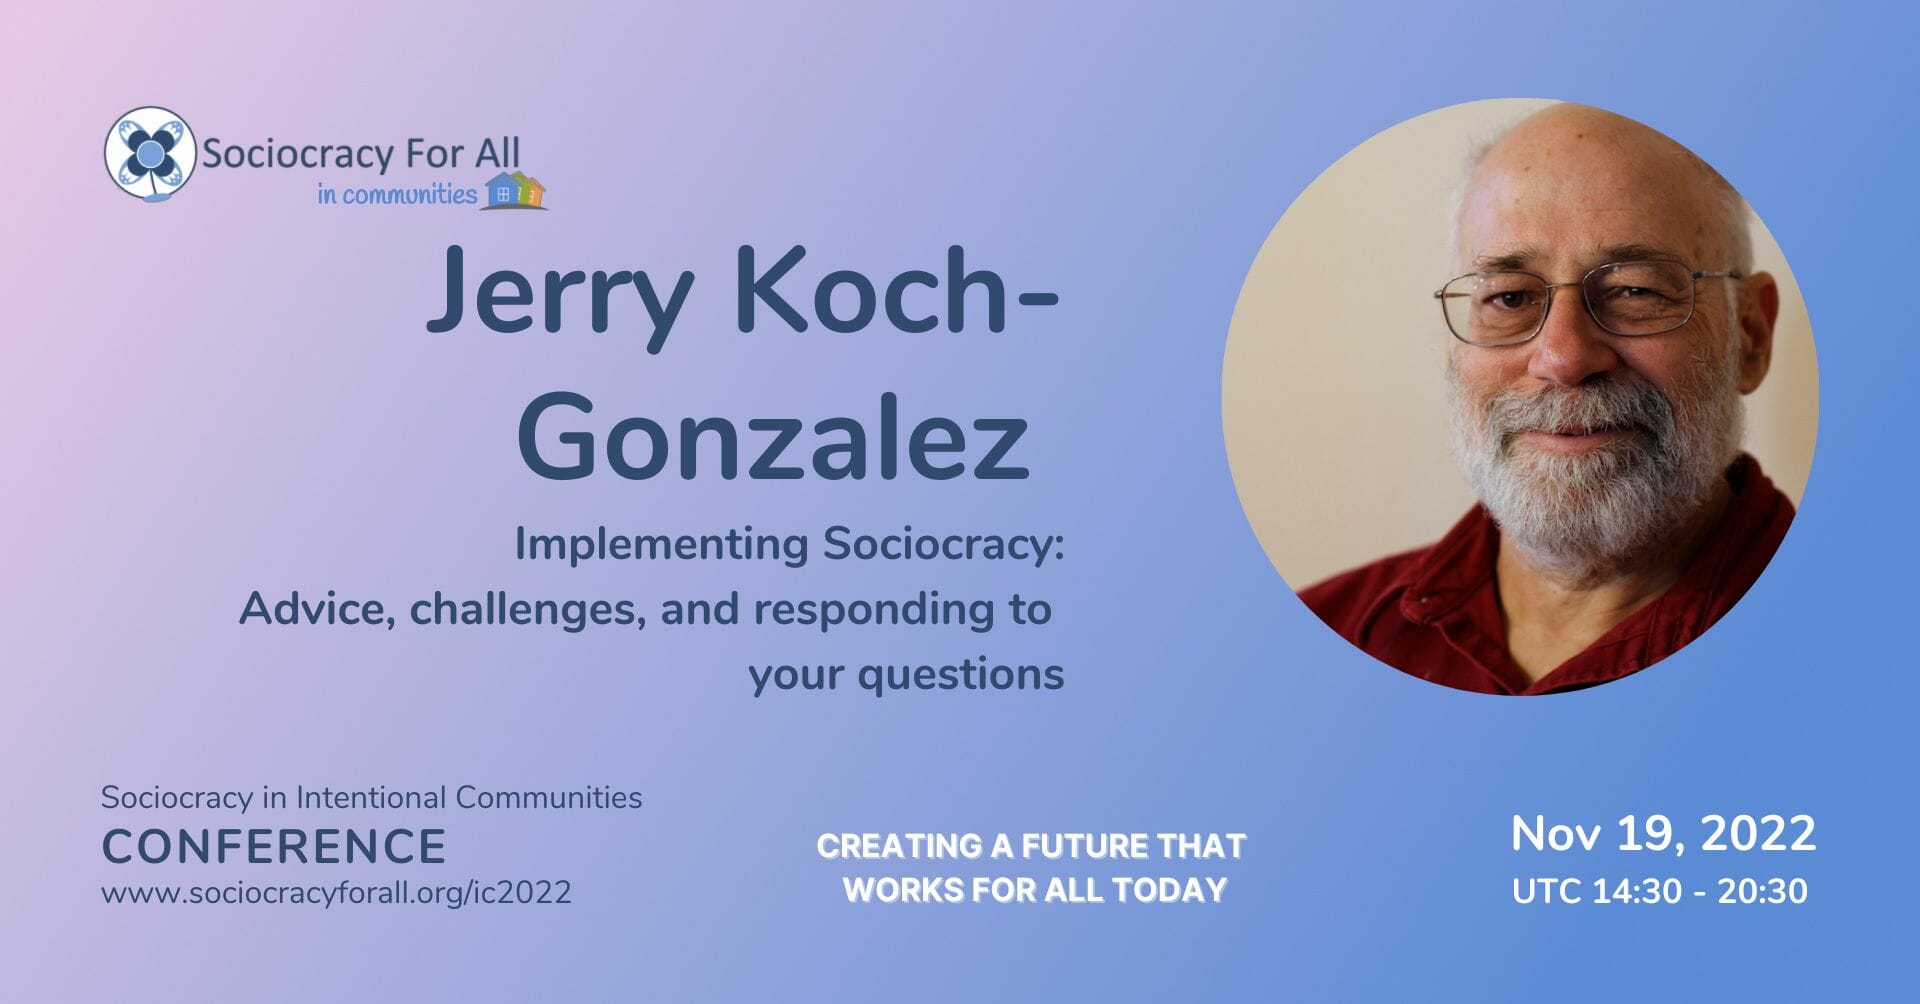 jerry koch gonzalez sociocracy in intentional communities conference 2022 - - Sociocracy For All